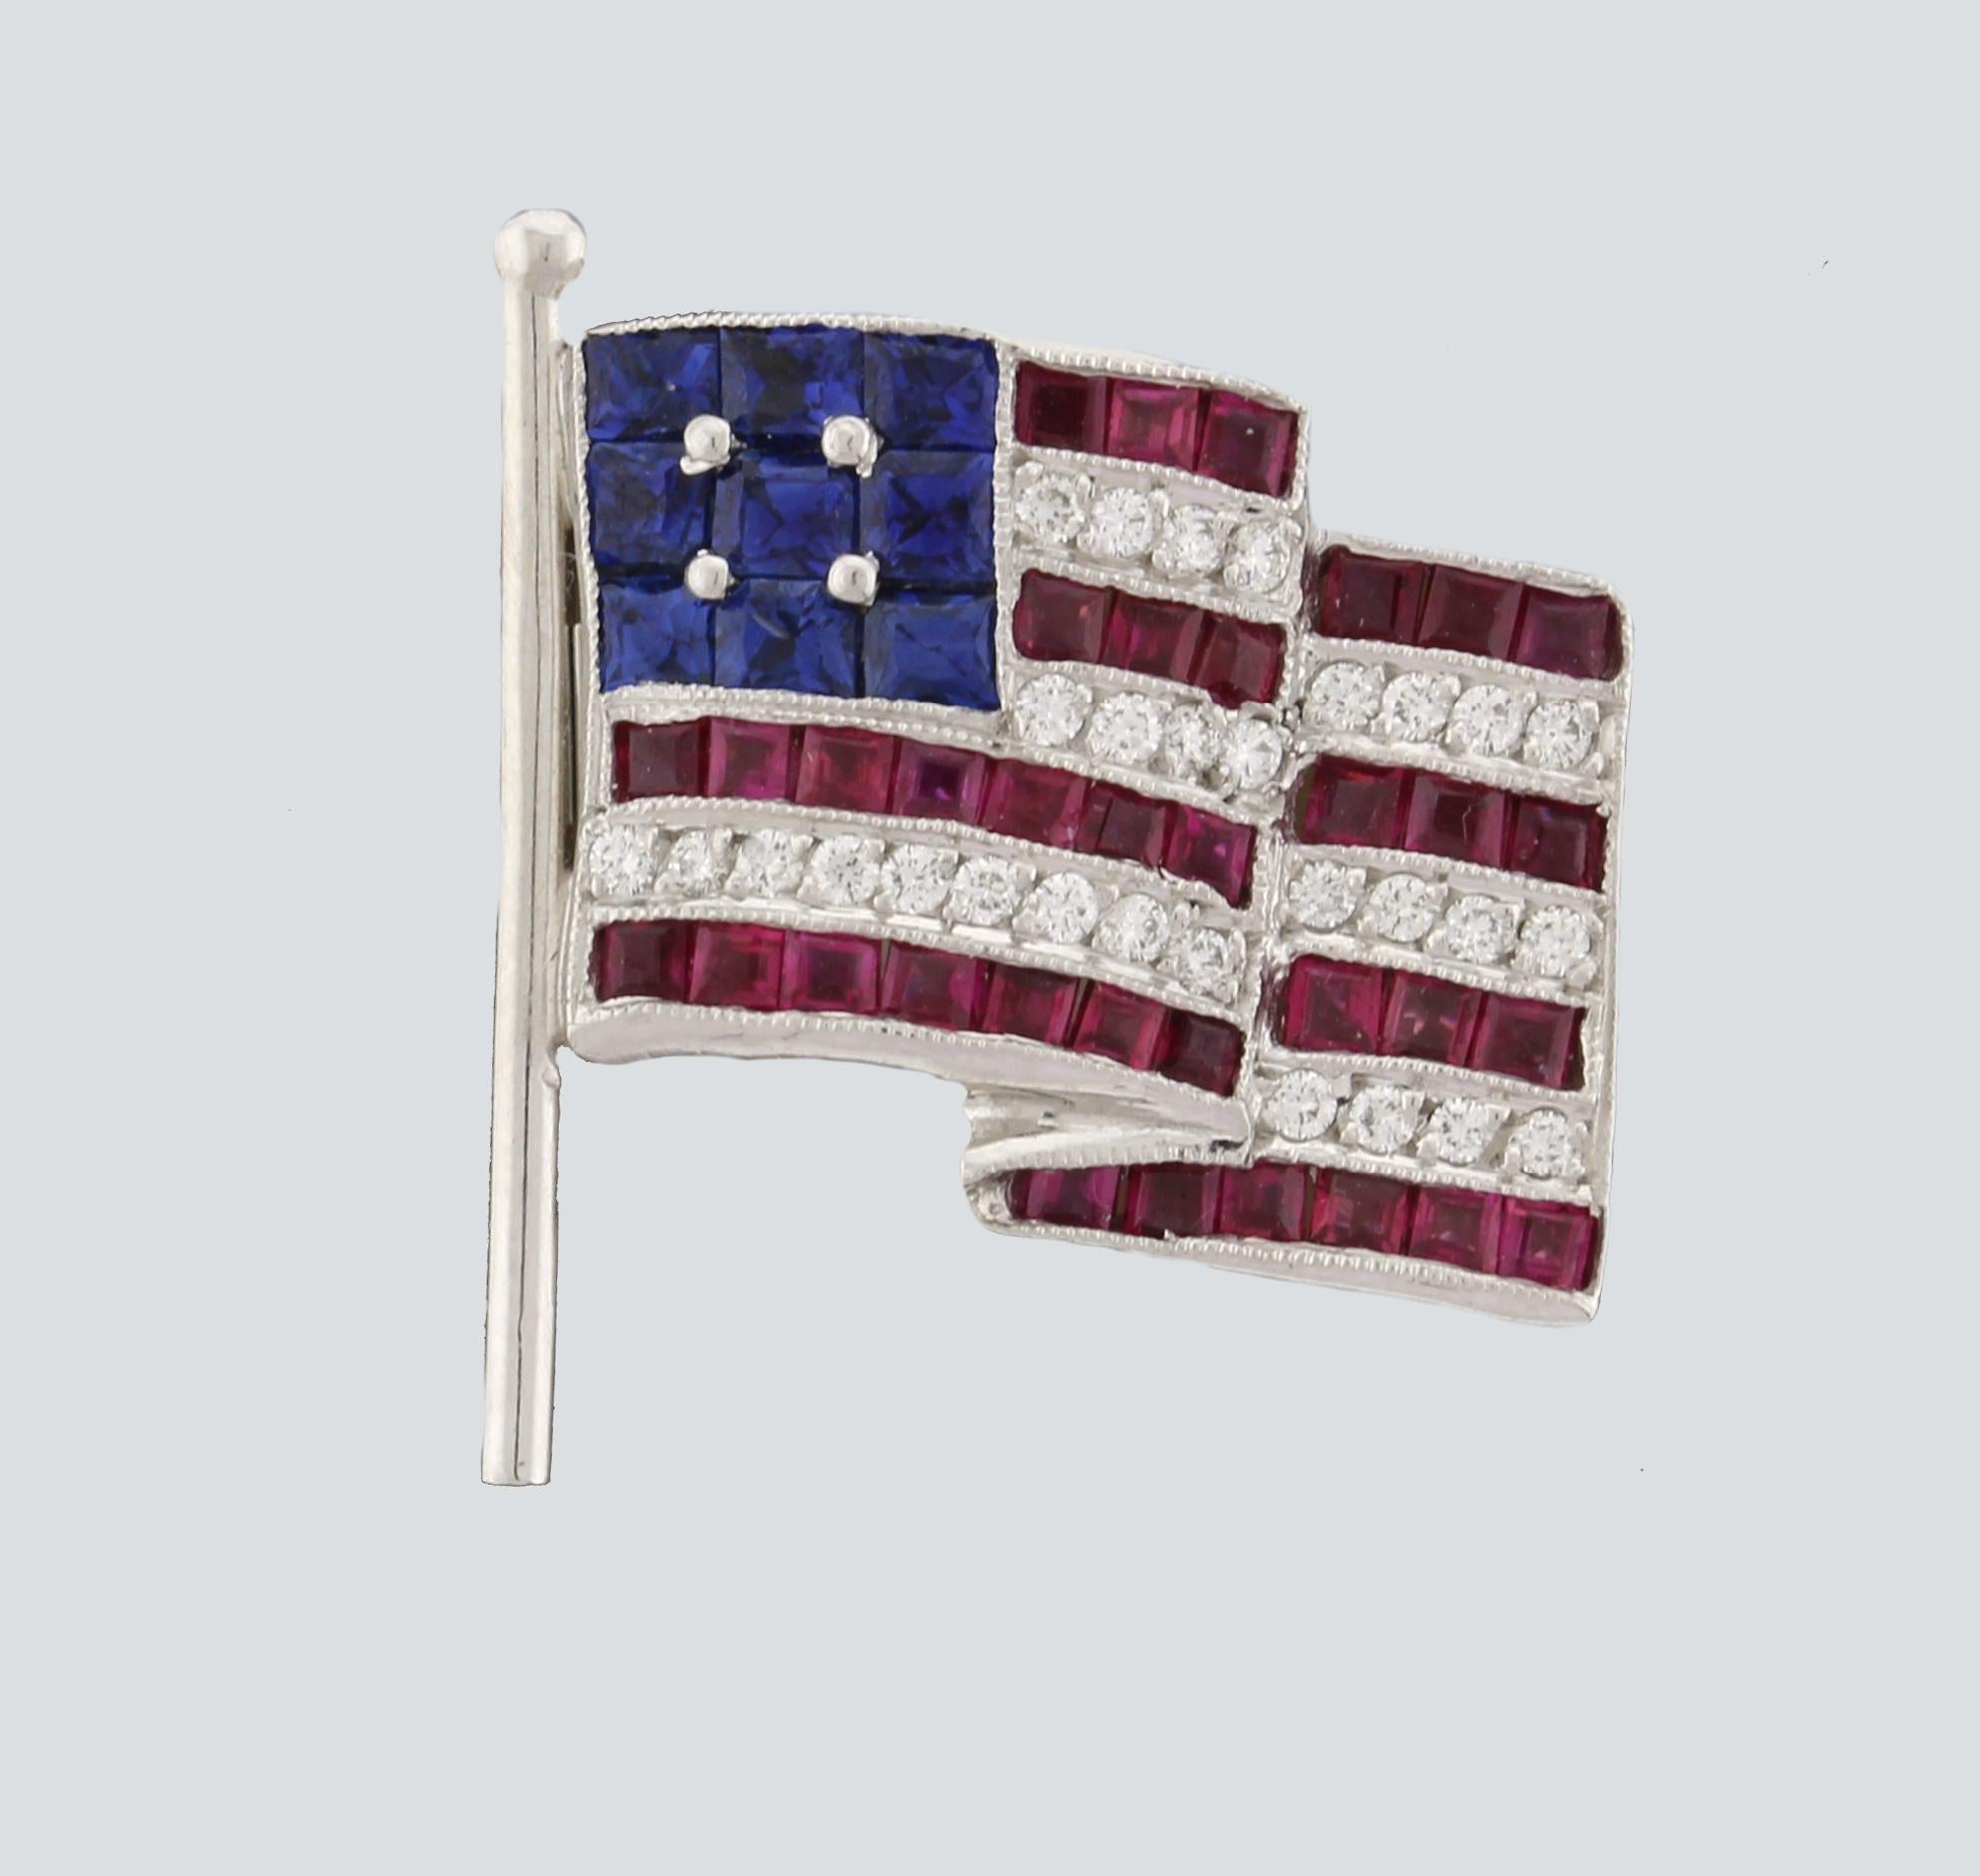 From Felix Vollman, an American Flag lapel pin/brooch, The platinum pin was made from the original 1930's mold and retailed by Pampillonia in Washington DC. The pin/brooch is 7/8th of an inch high and ¾ on an inch wide. Set with calibrated fine